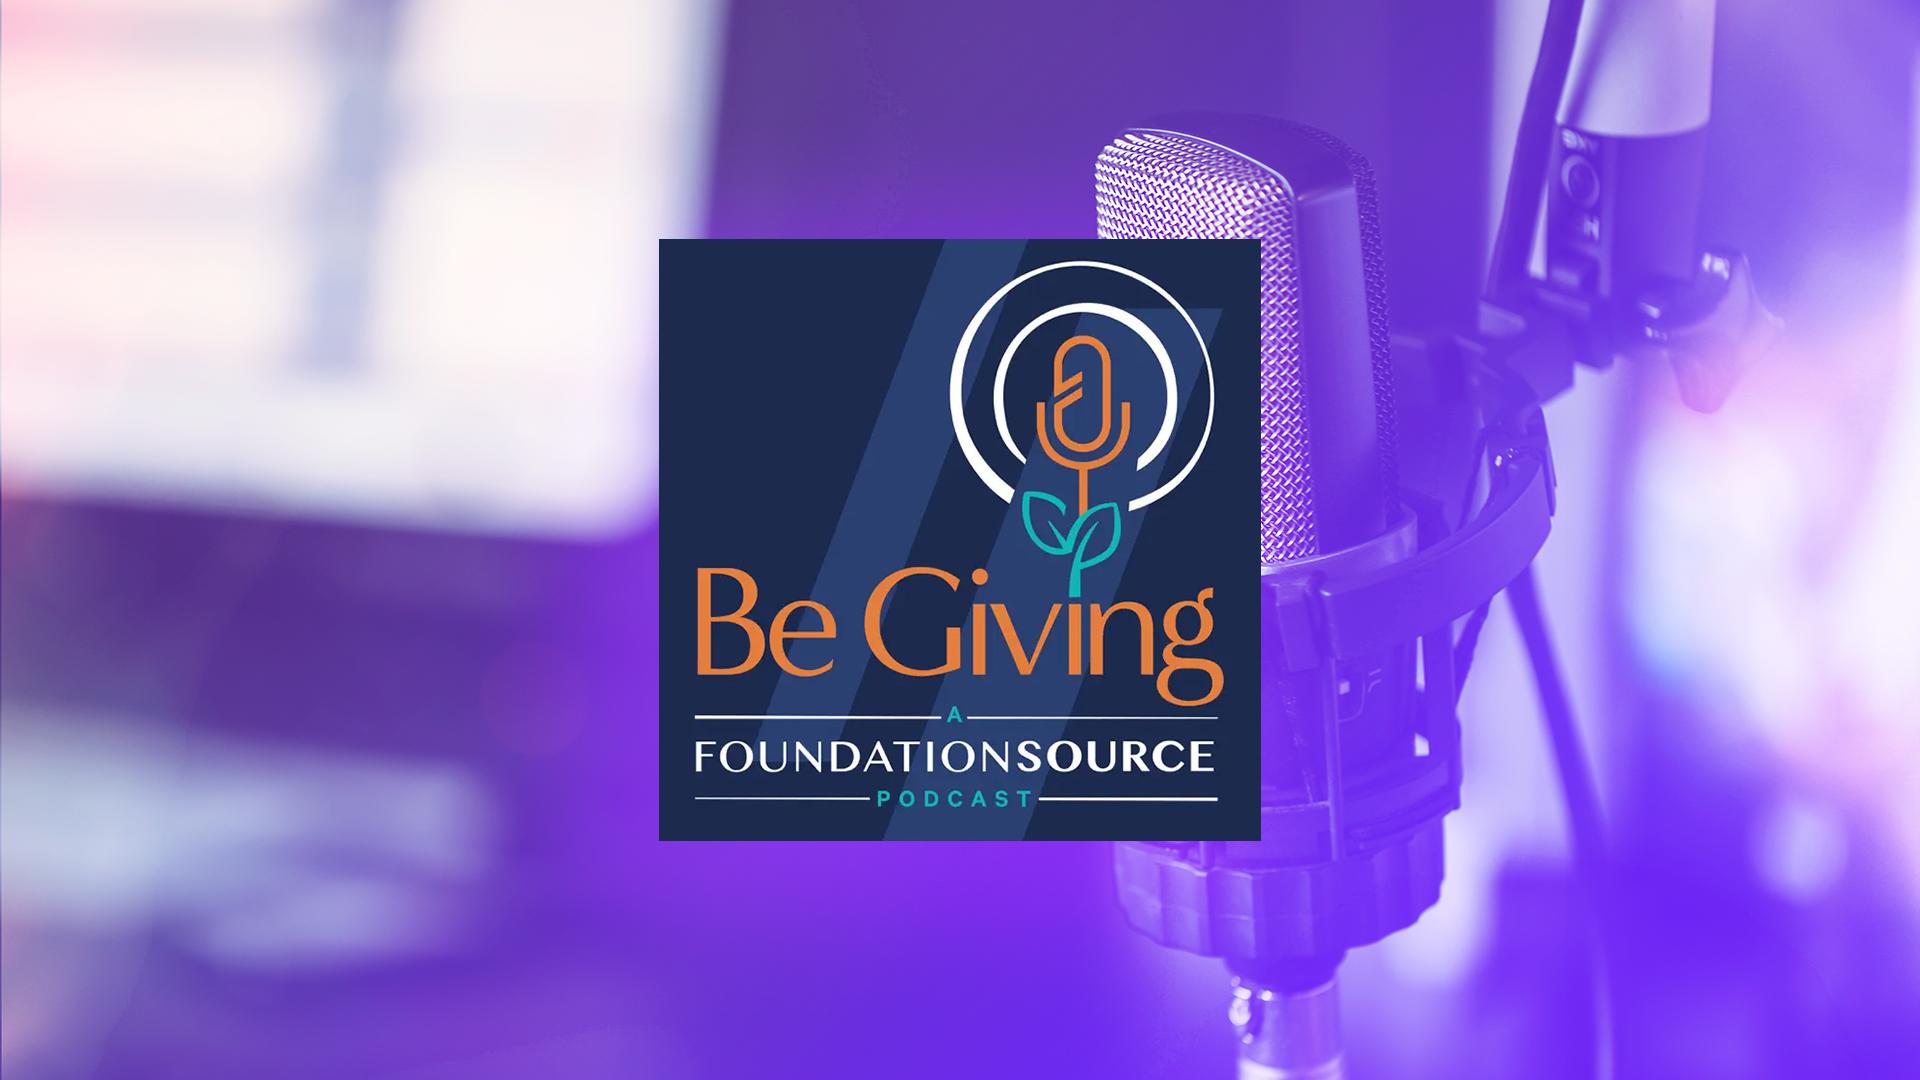 Be Giving Podcast logo